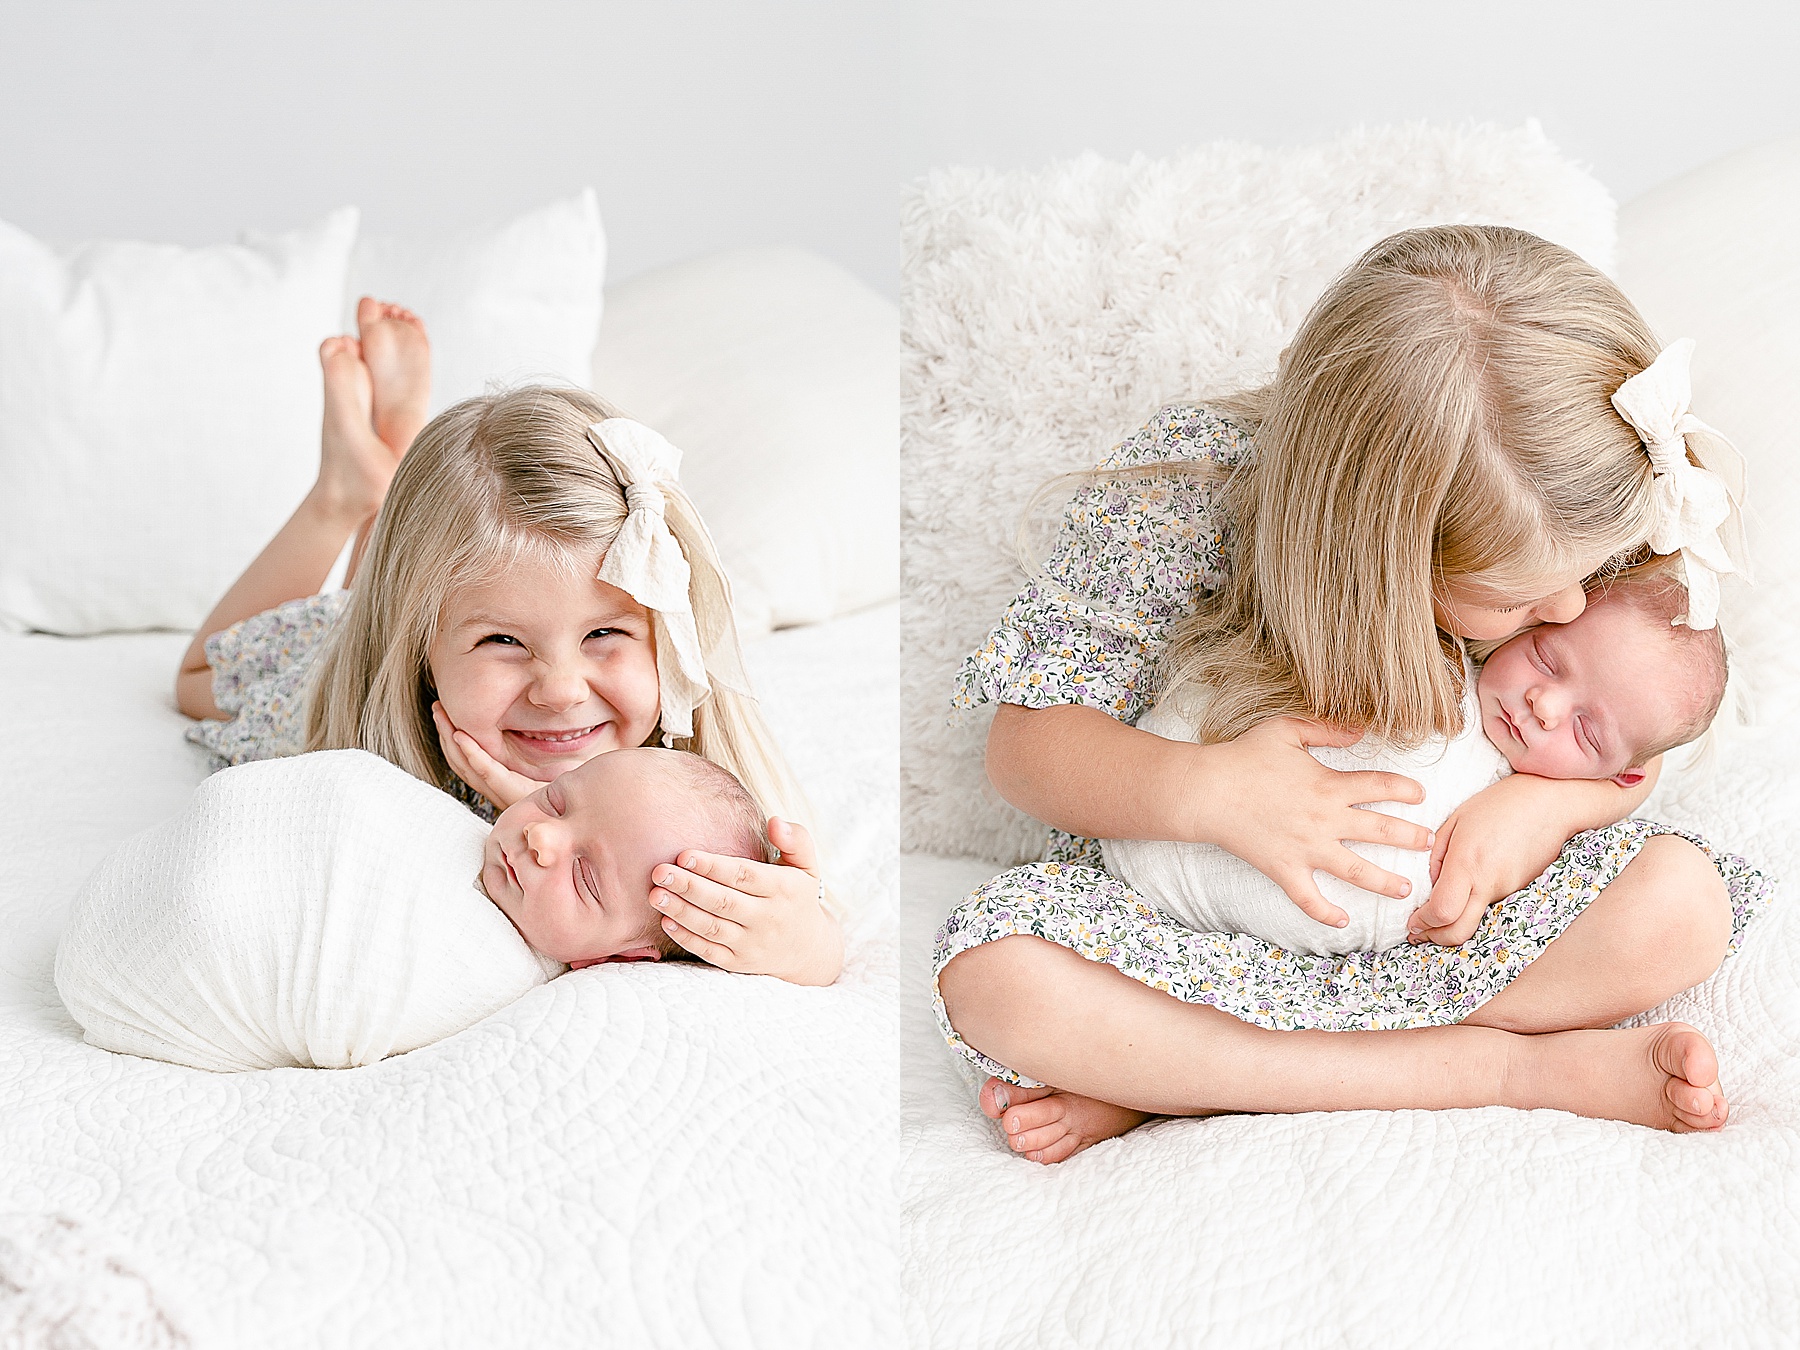 big sister holding newborn wrapped in white swaddle at studio newborn family photography session in se portland oregon